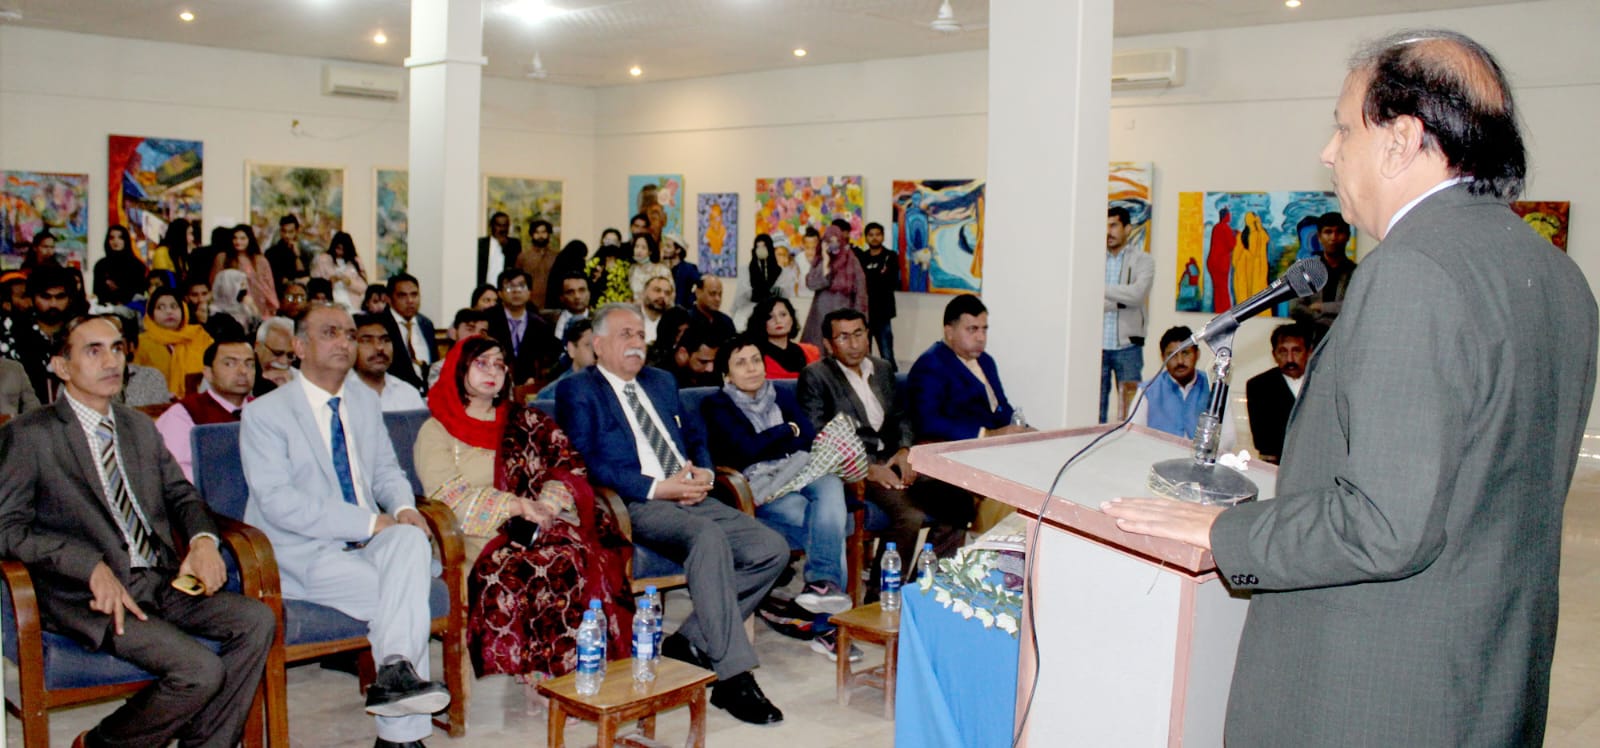 Sindh-University-Thesis-Exhibition-Sindh Courier-4